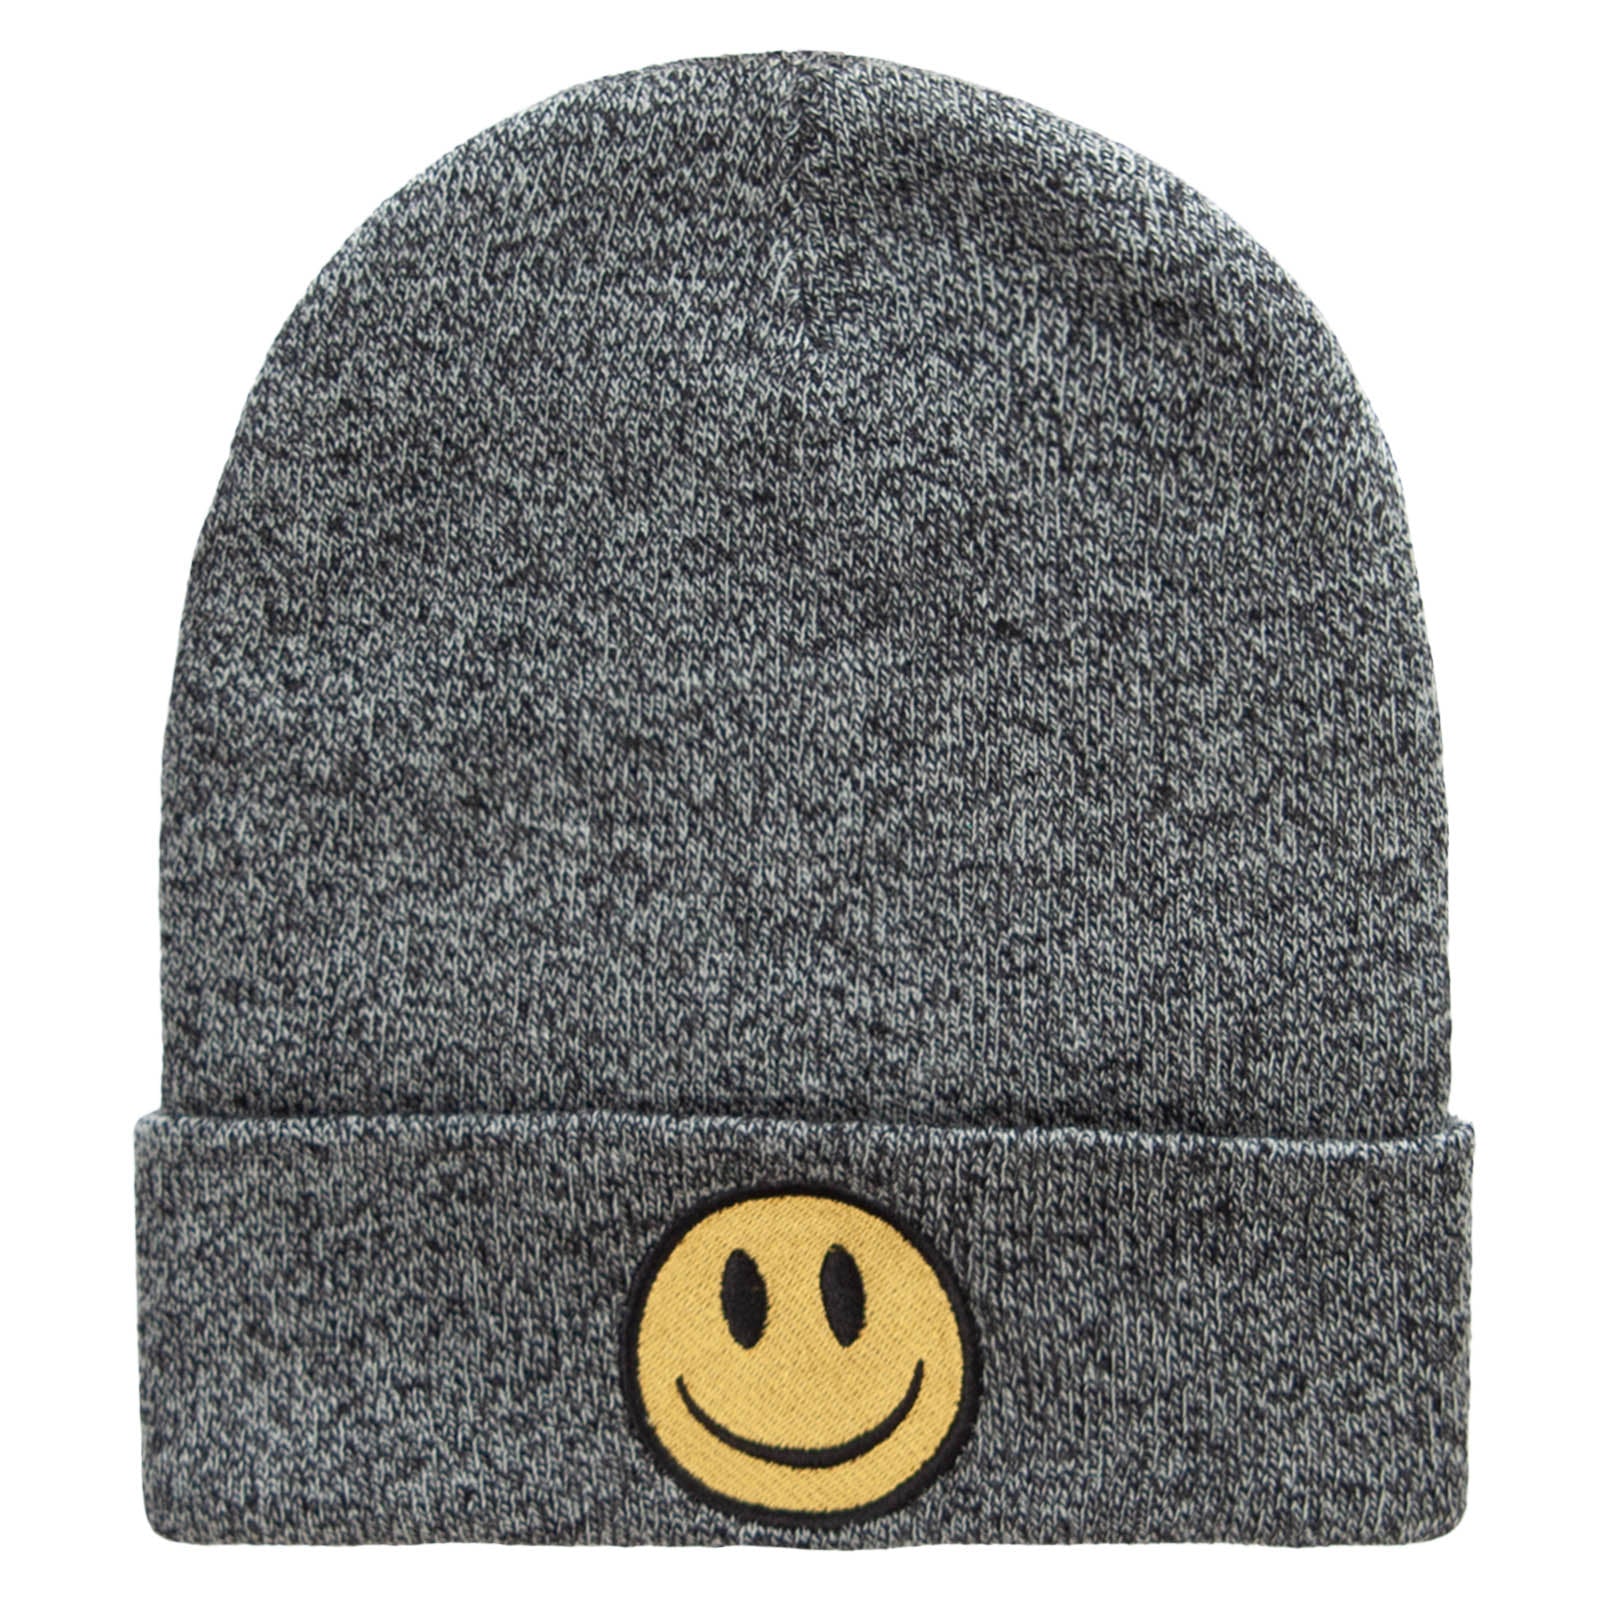 Smile Face Embroidered Long Beanie - Black Marled OSFM